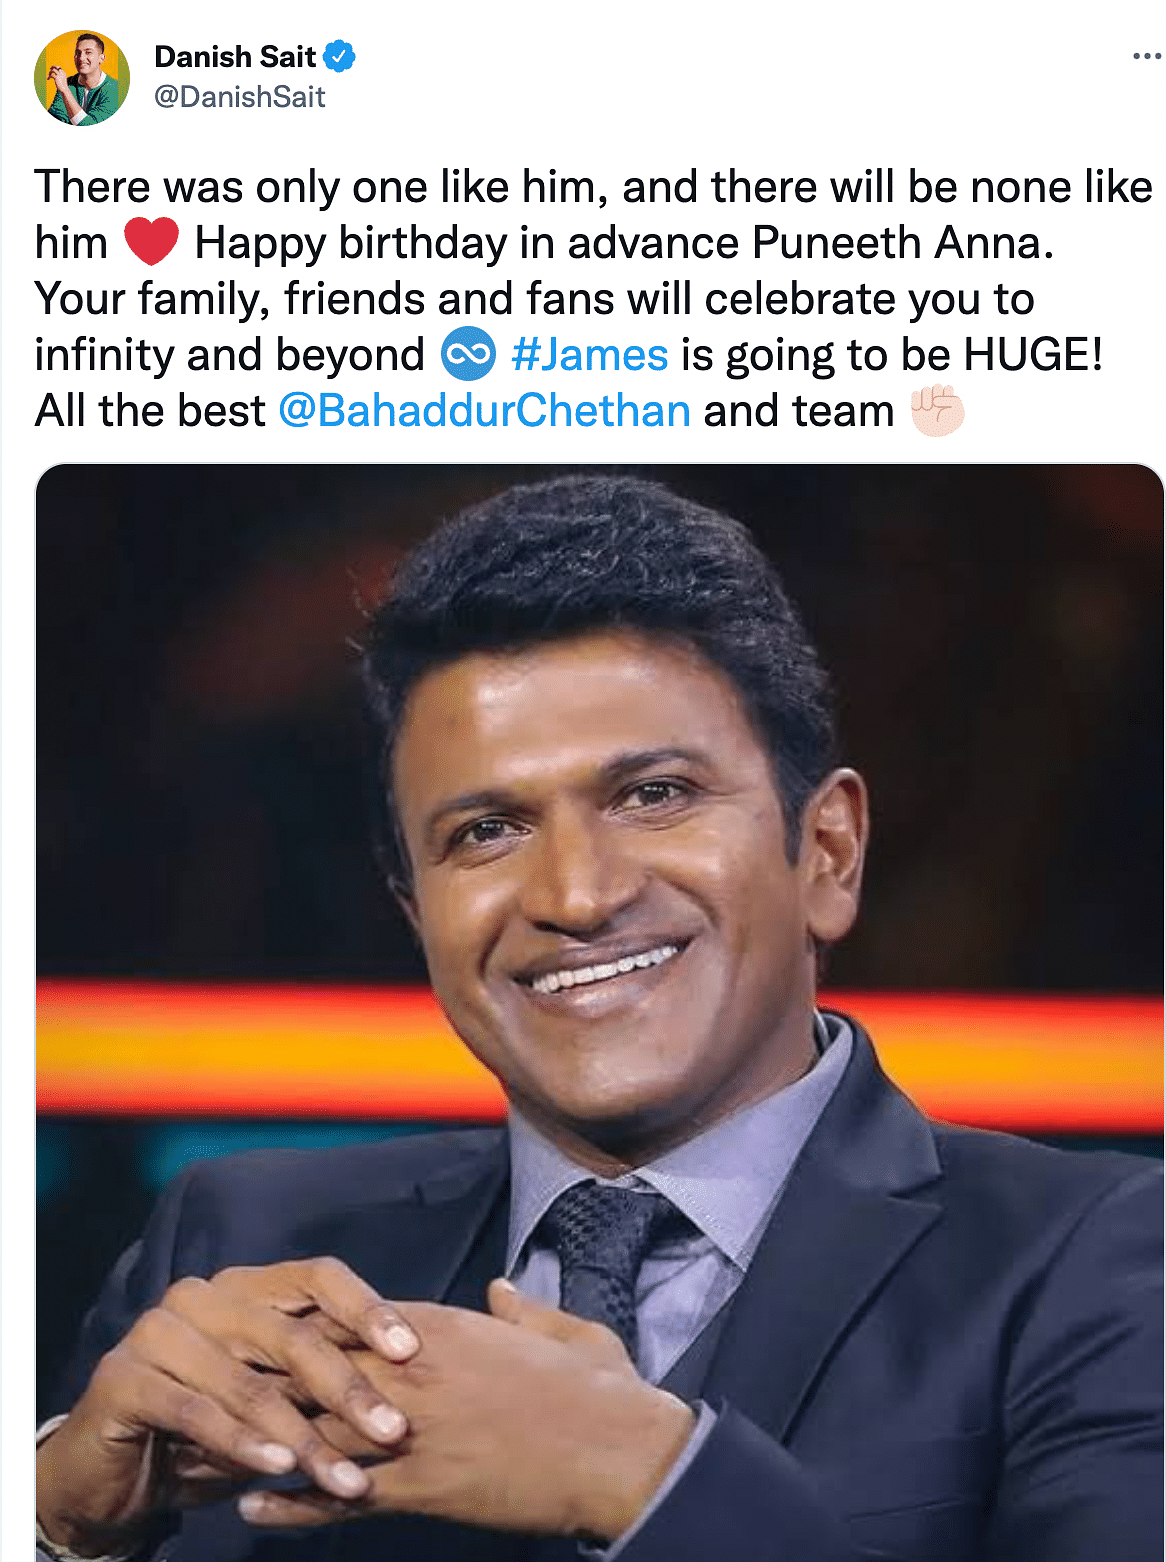 Puneeth Rajkumar passed away on 29 October, 2021, after suffering a massive heart attack.